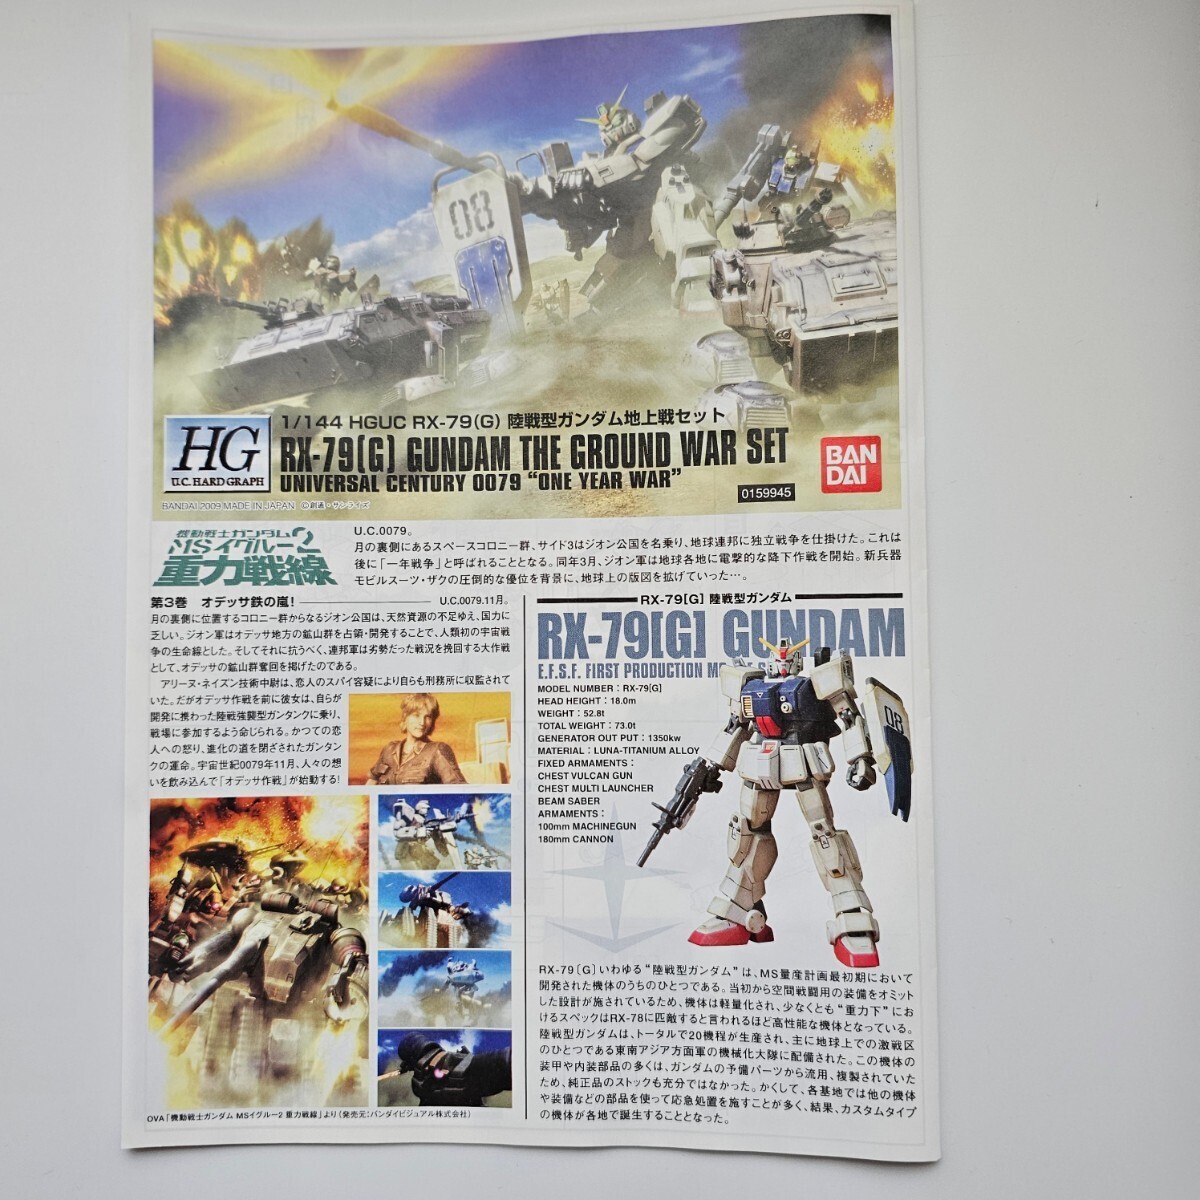 [ free shipping not yet constructed ] land war type Gundam ground war set (1/144 scale HGUC Mobile Suit Gundam no. 08MS small .2071805) control number 0016